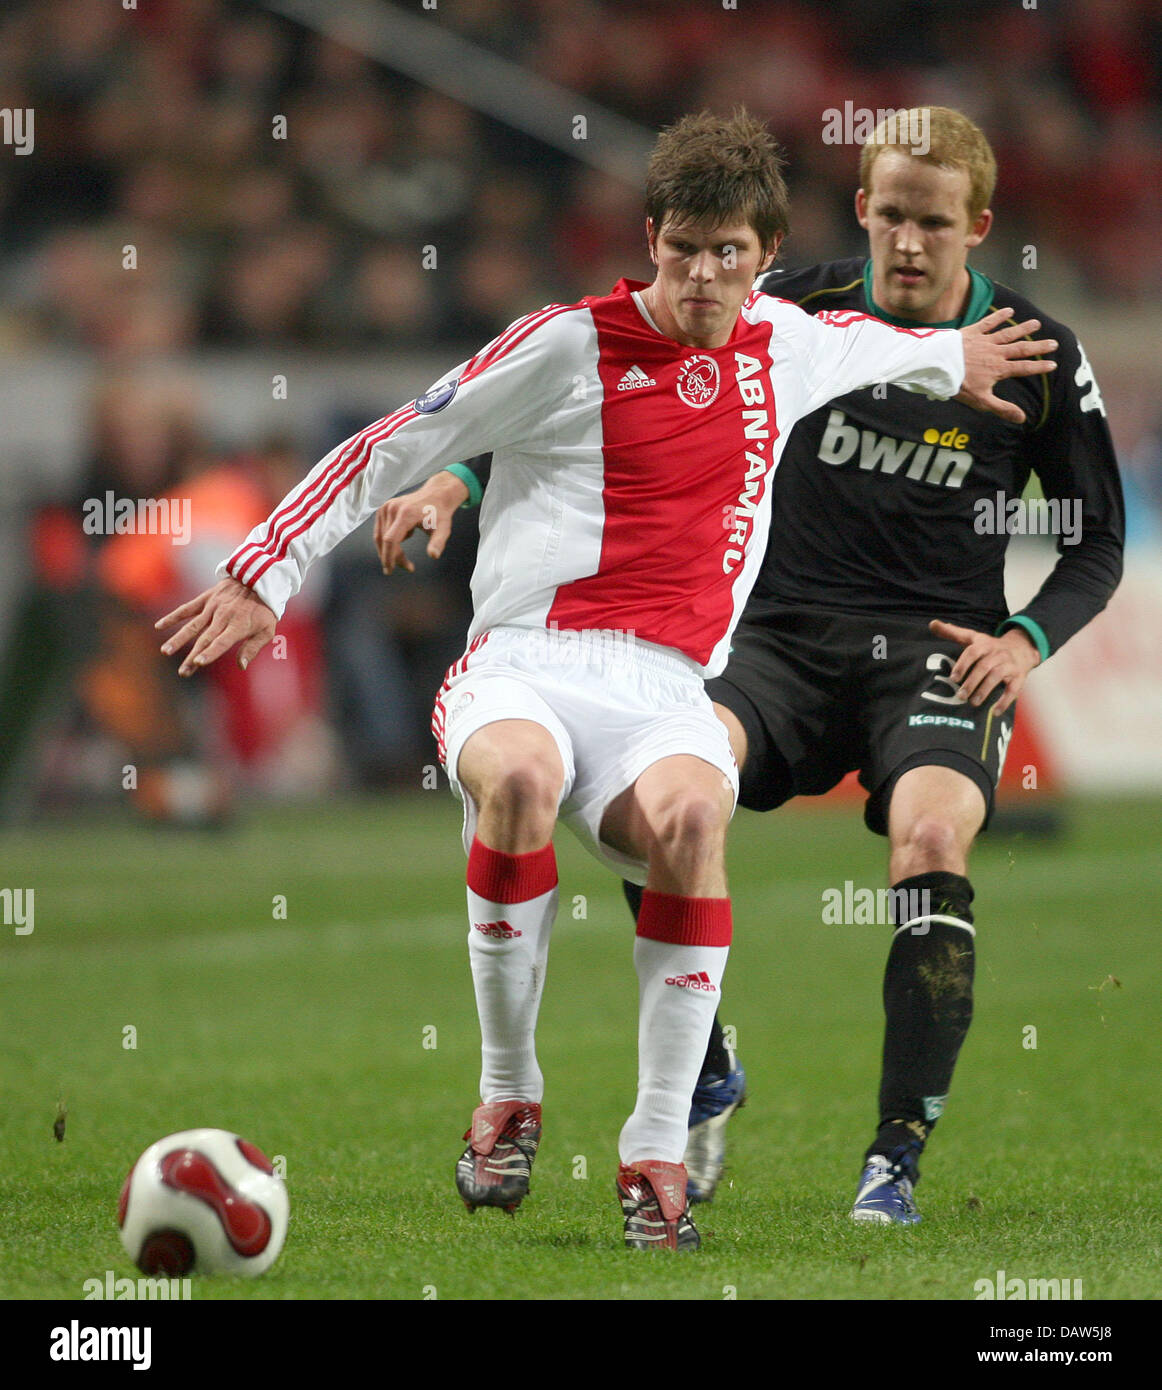 Klaas Jan Huntelaar (L) of Amsterdam protects the ball from Bremen's Petri Pasanen (R) during the UEFA Cup Round of 32 match Ajax Amsterdam v SV Werder Bremen at the Amsterdam Arena of Amsterdam, Netherlands, 22 February 2007. After winning the first leg 3-0, a humbling 3-1 loss in the second leg was enough for Bremen to move up to round of 16. Photo: Camen Jaspersen Stock Photo